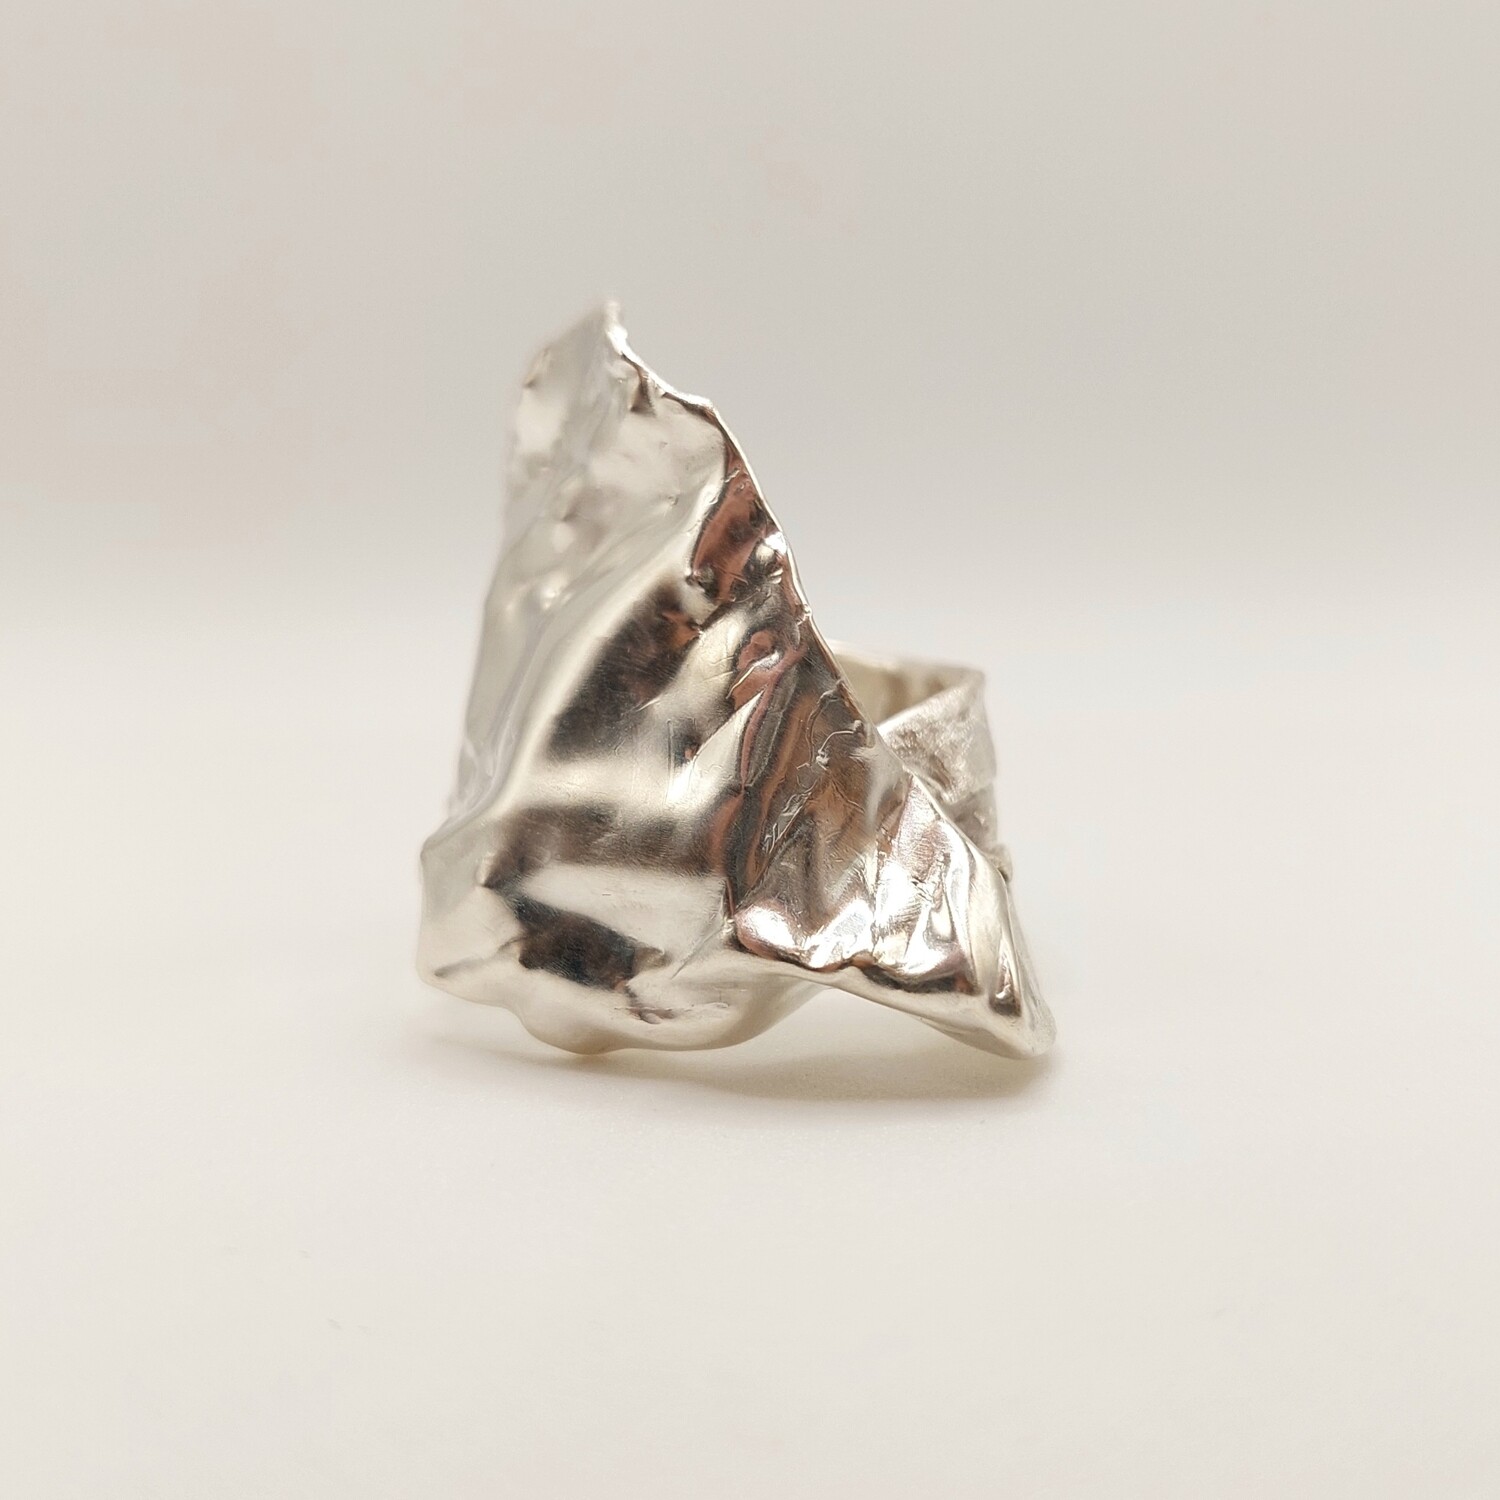 ABSTRACT RING